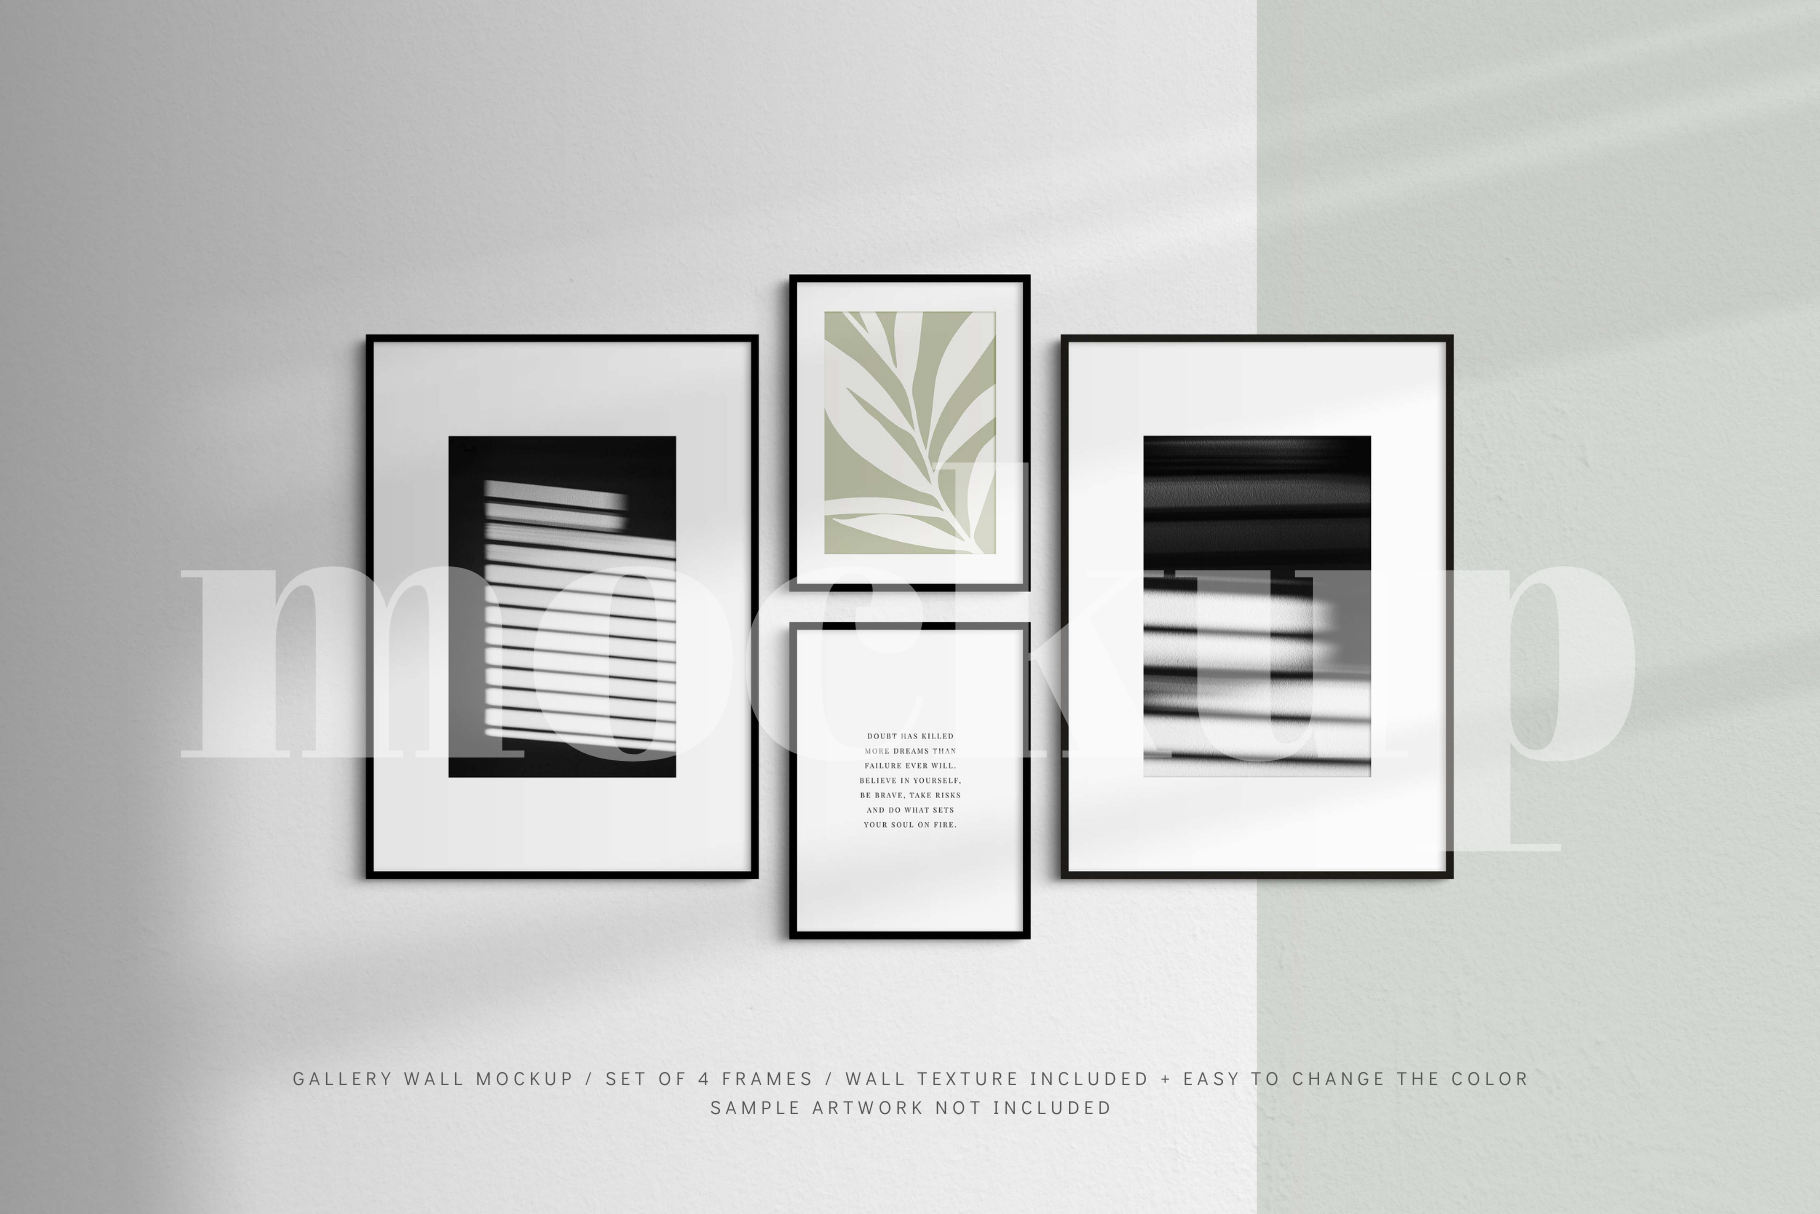 Showcase your artwork in an elegant, modern way with this customizable and easy-to-use minimalist gallery wall frame mockup that features a set of 4 thin black frames.